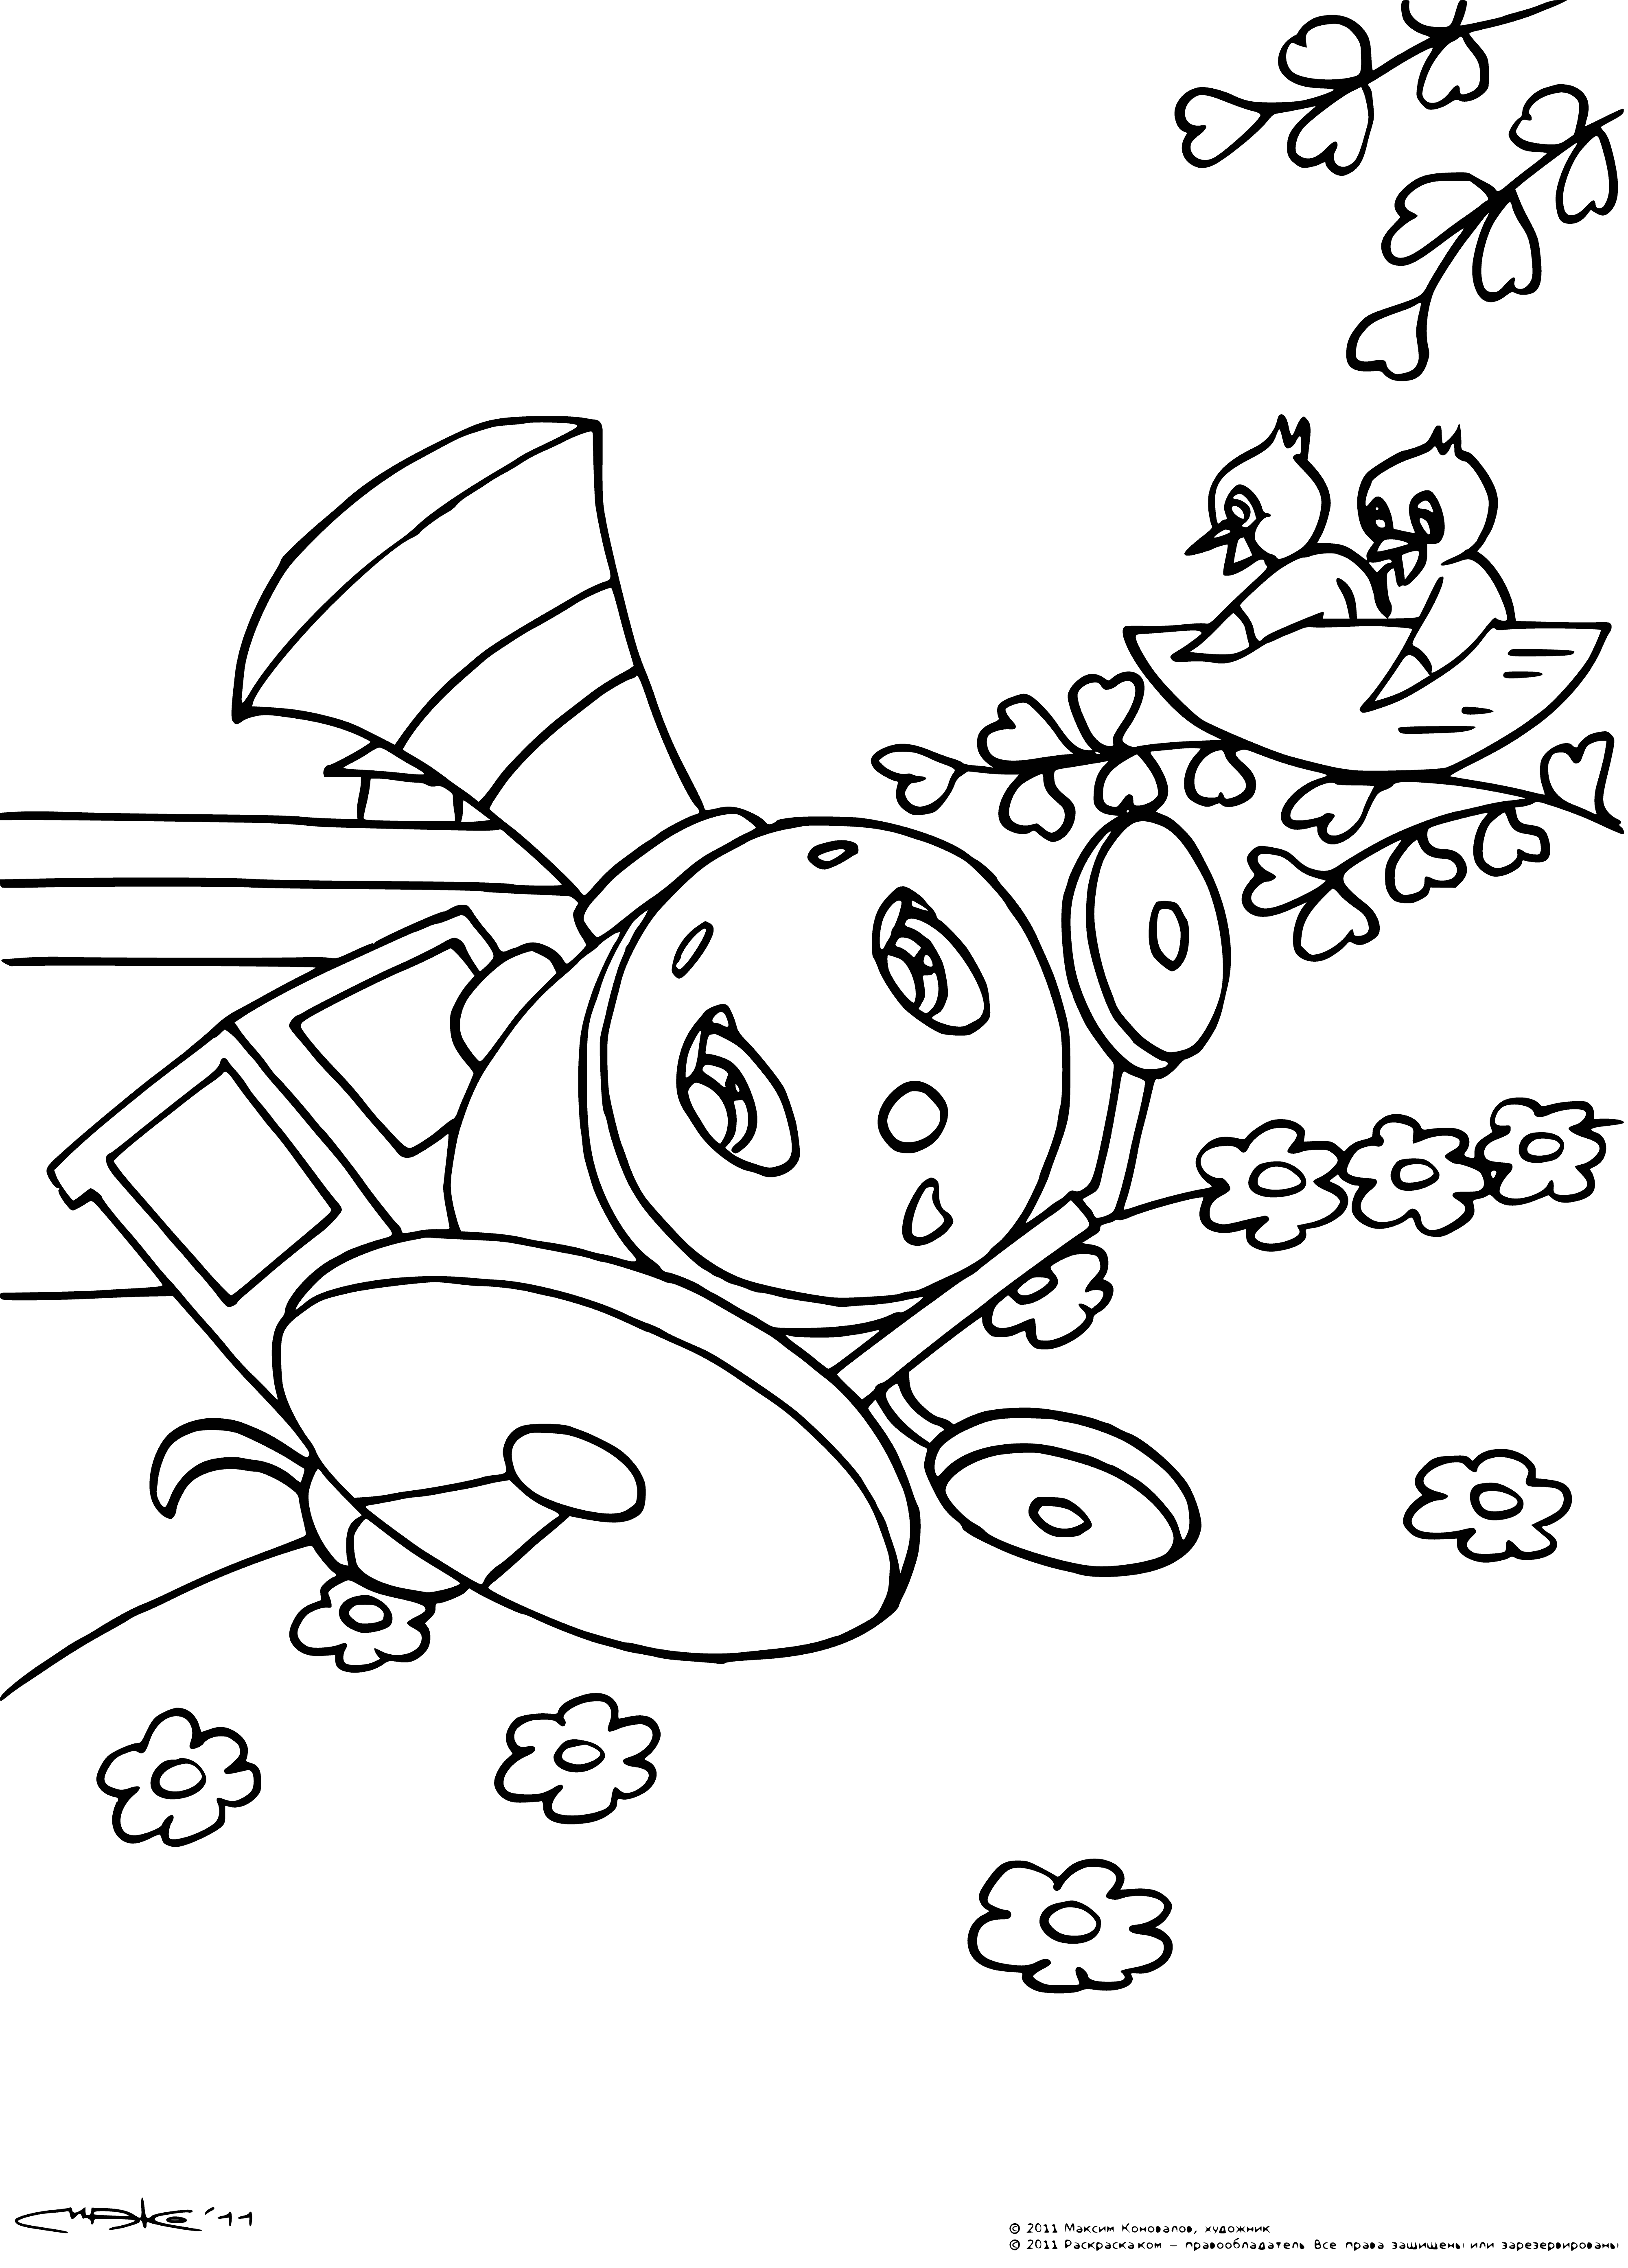 coloring page: Abandoned black locomotive in a field needs repair - Bird's Nest locomotive from Romashkovo.